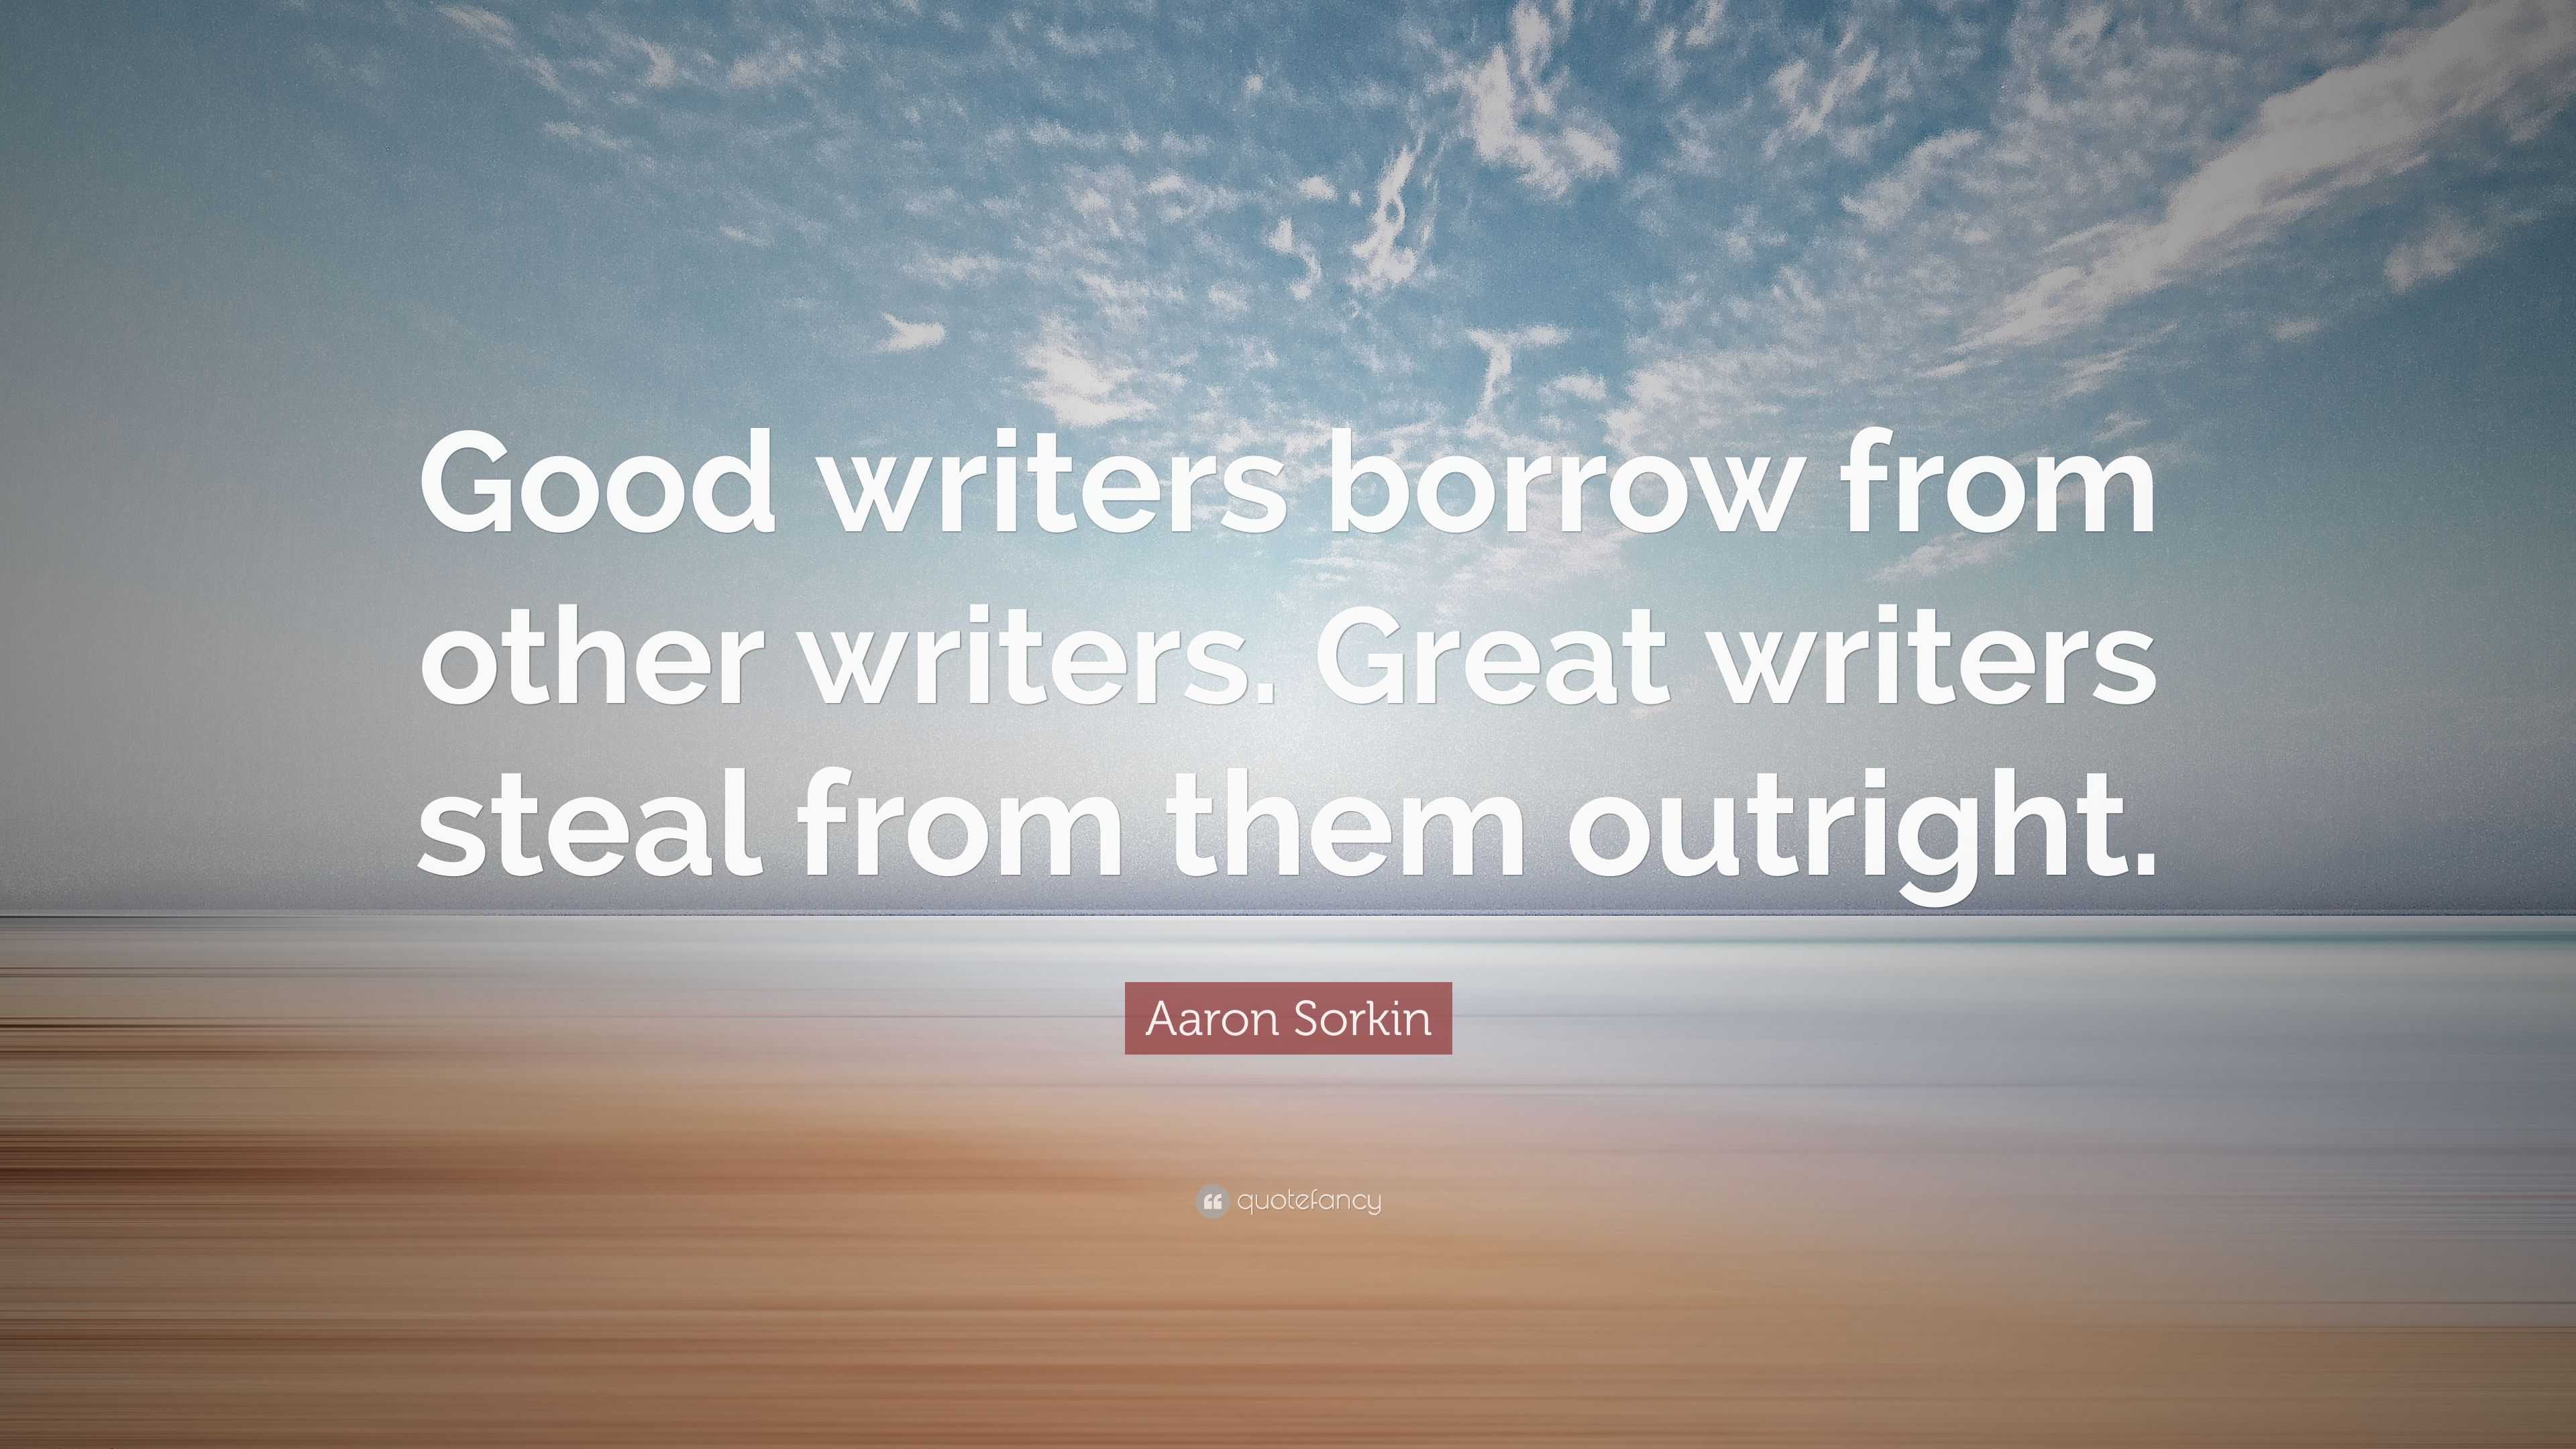 Aaron Sorkin Quote: “Good writers borrow from other writers. Great